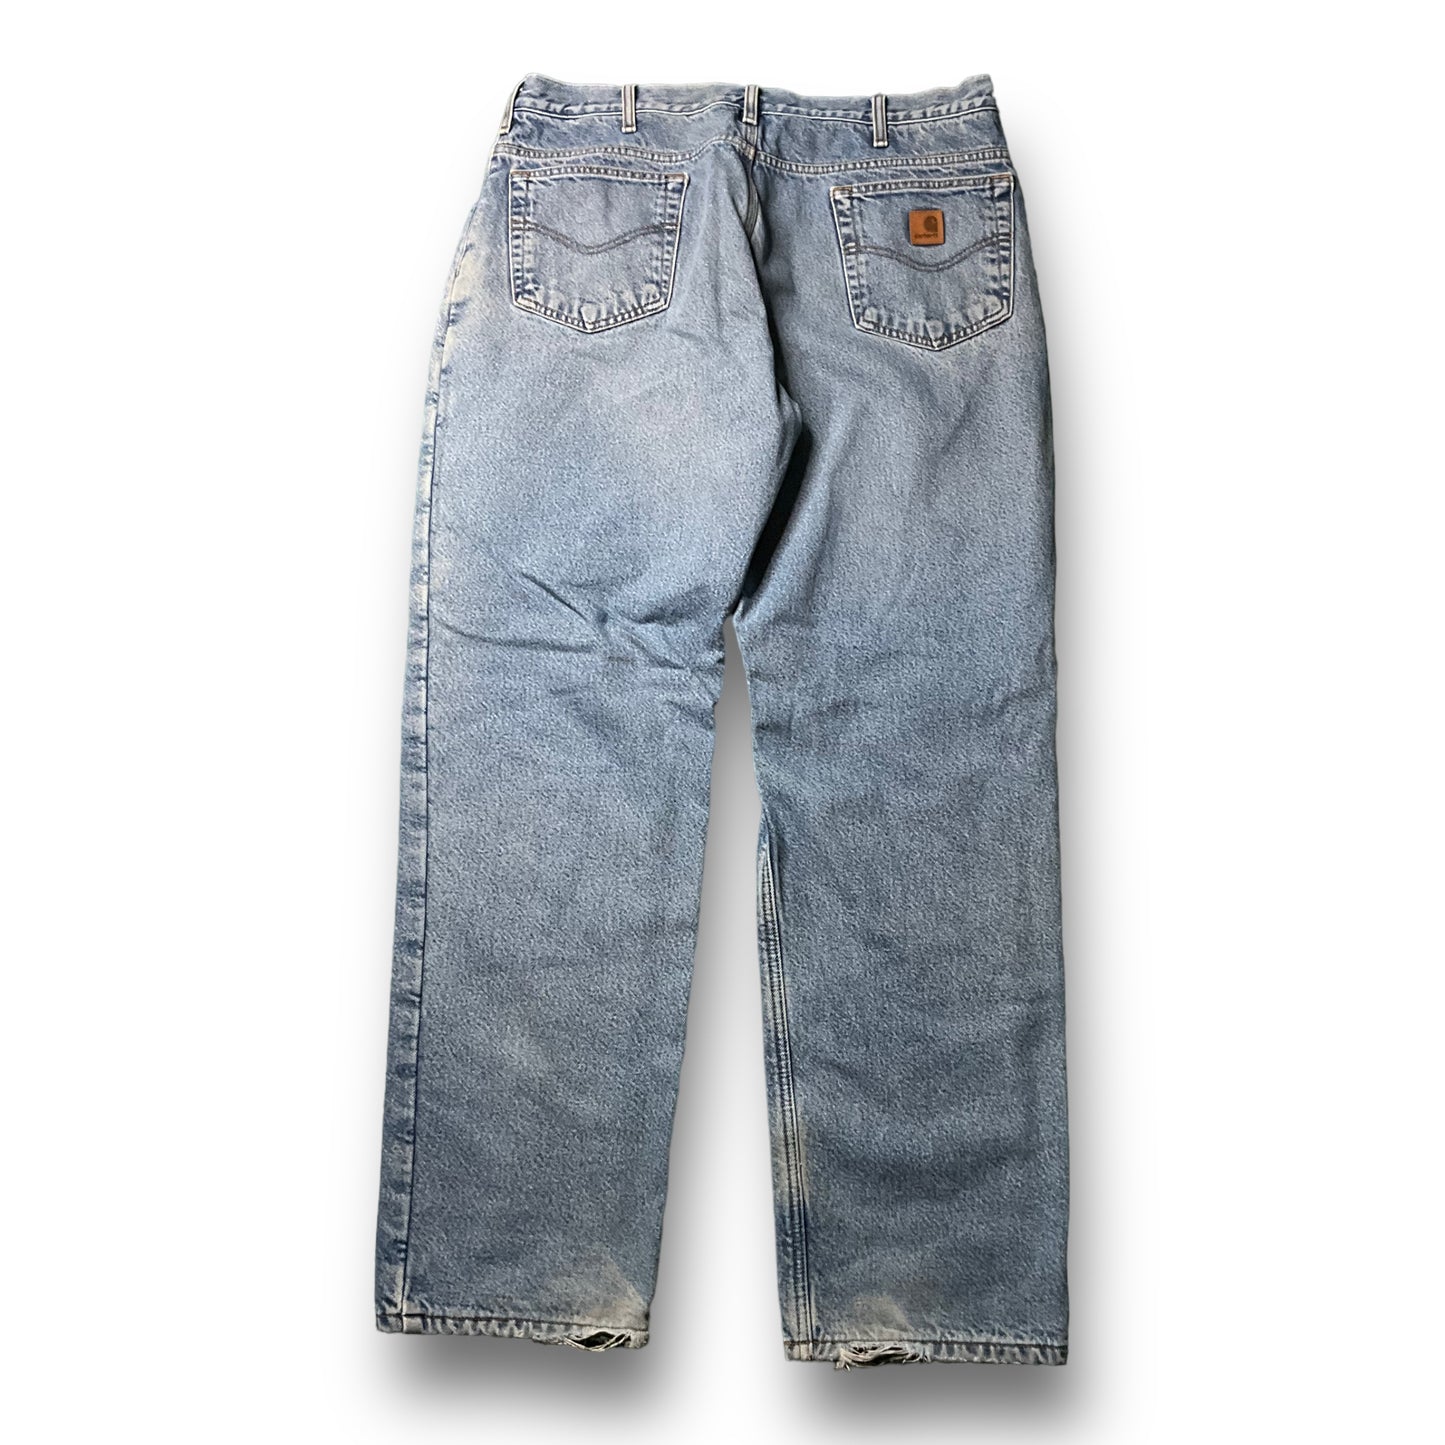 Carhartt Relaxed Fit Jeans (36x30)